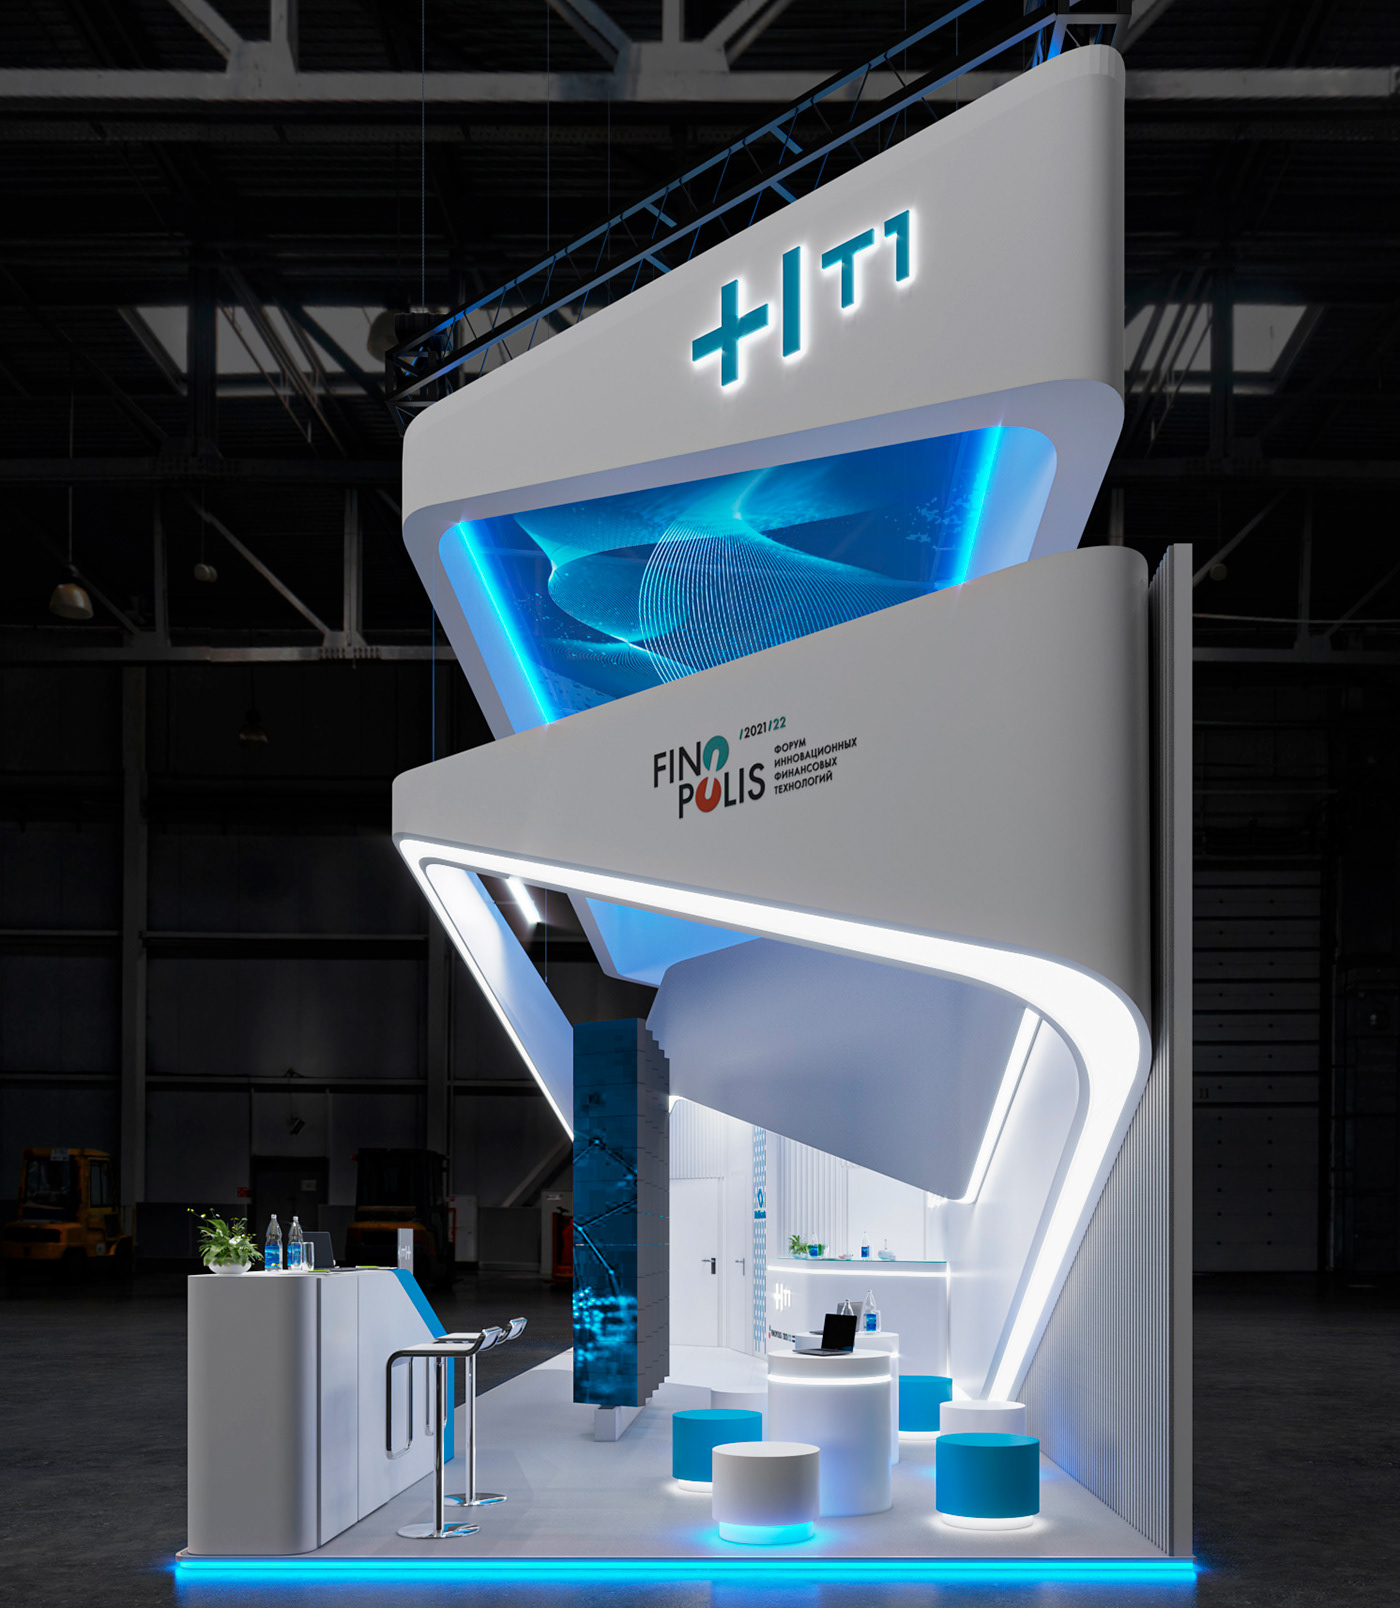 3D architecture Event expo exterior Stand booth design booth выставочный дизайн Выставочный стенд